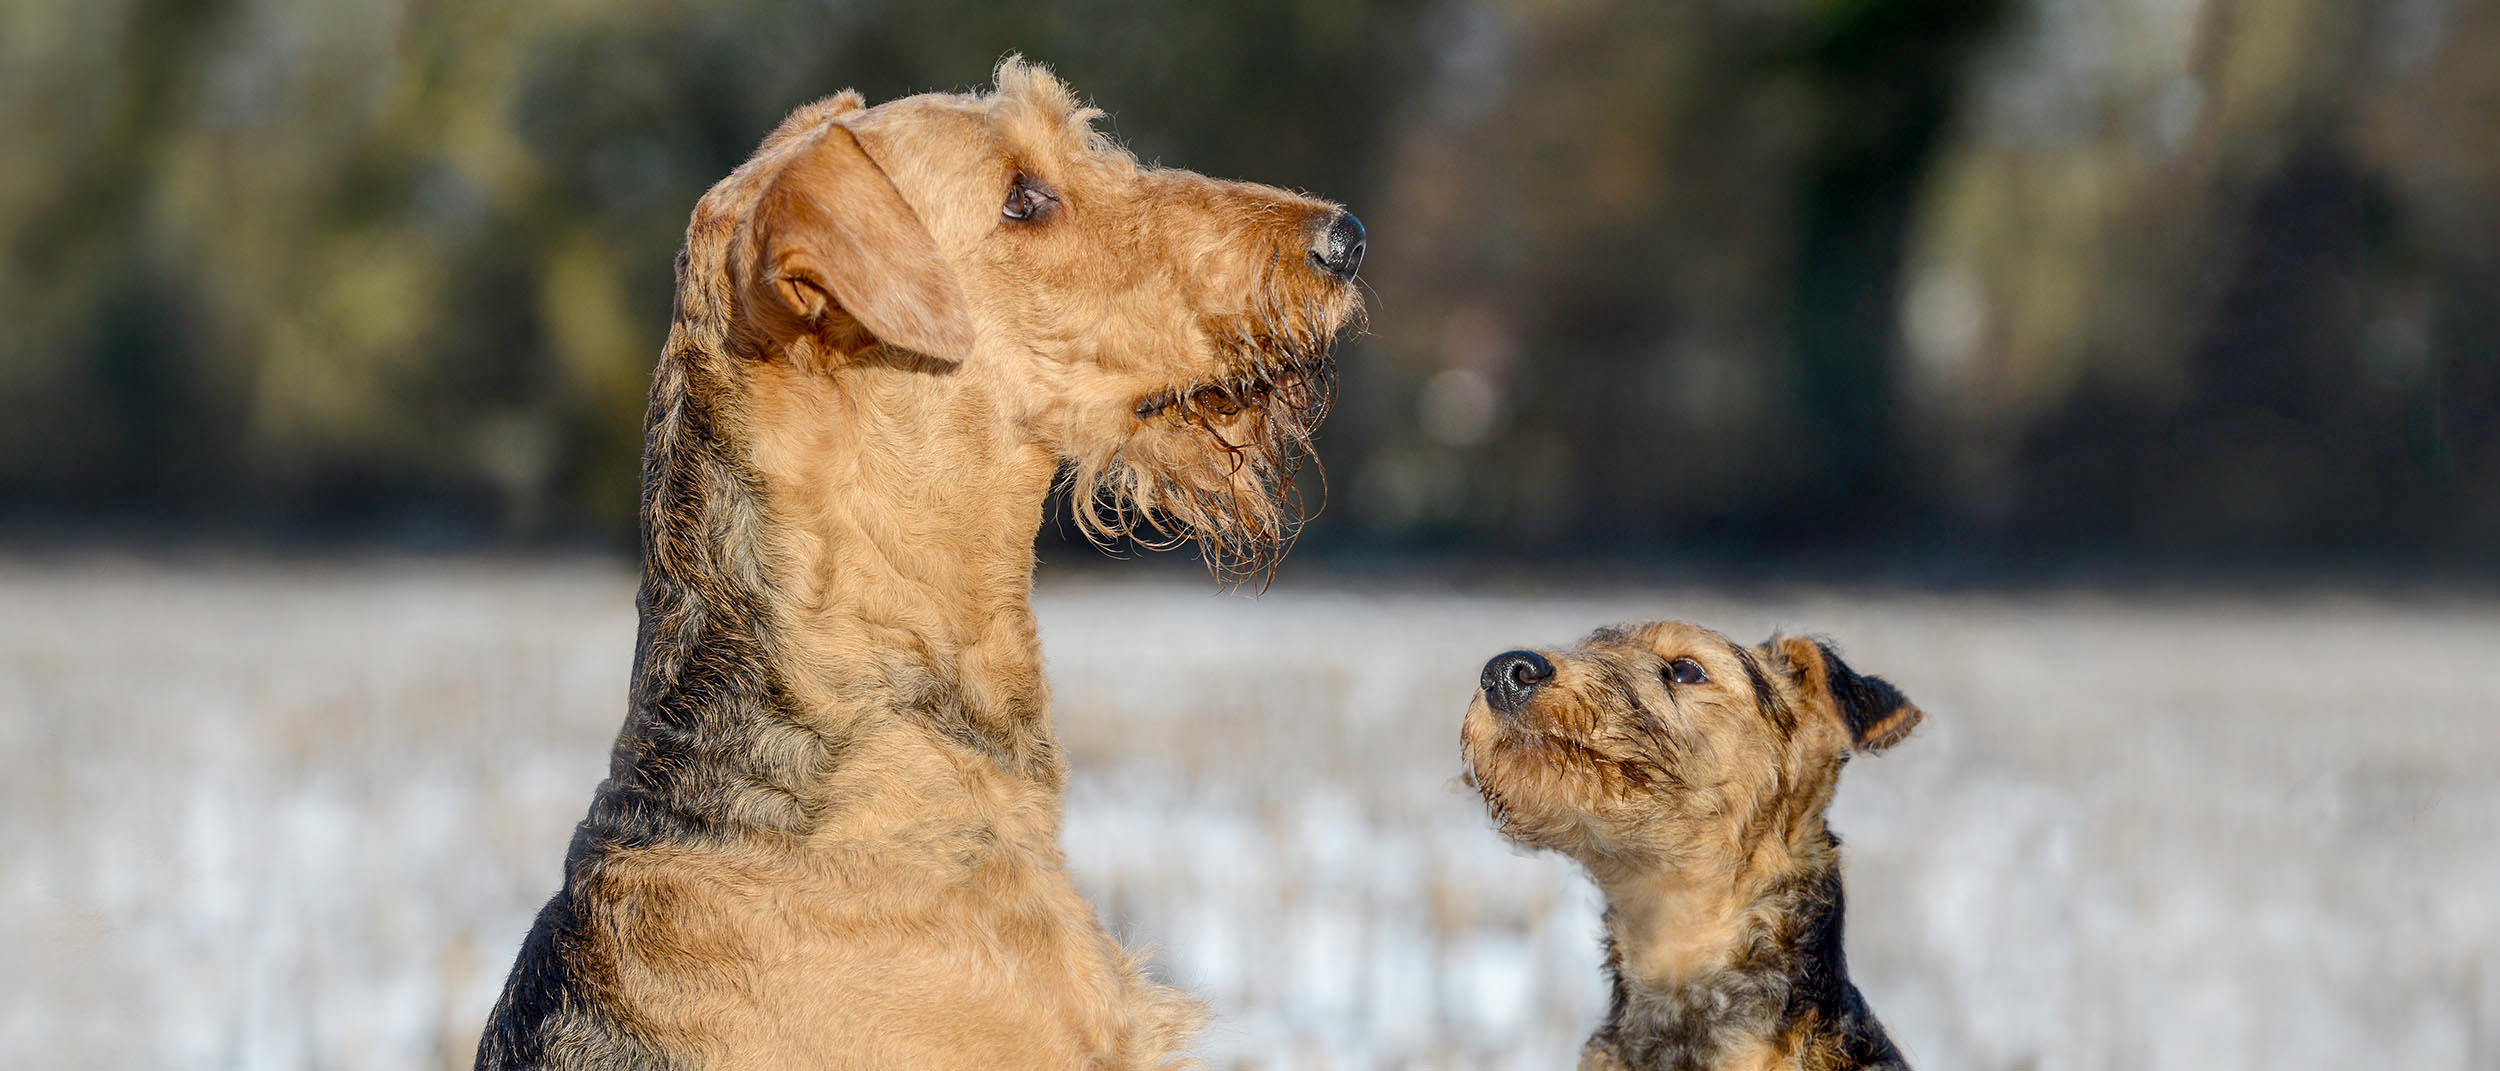 Puppy and adult Airedale Terrier sitting down in a snowy field.